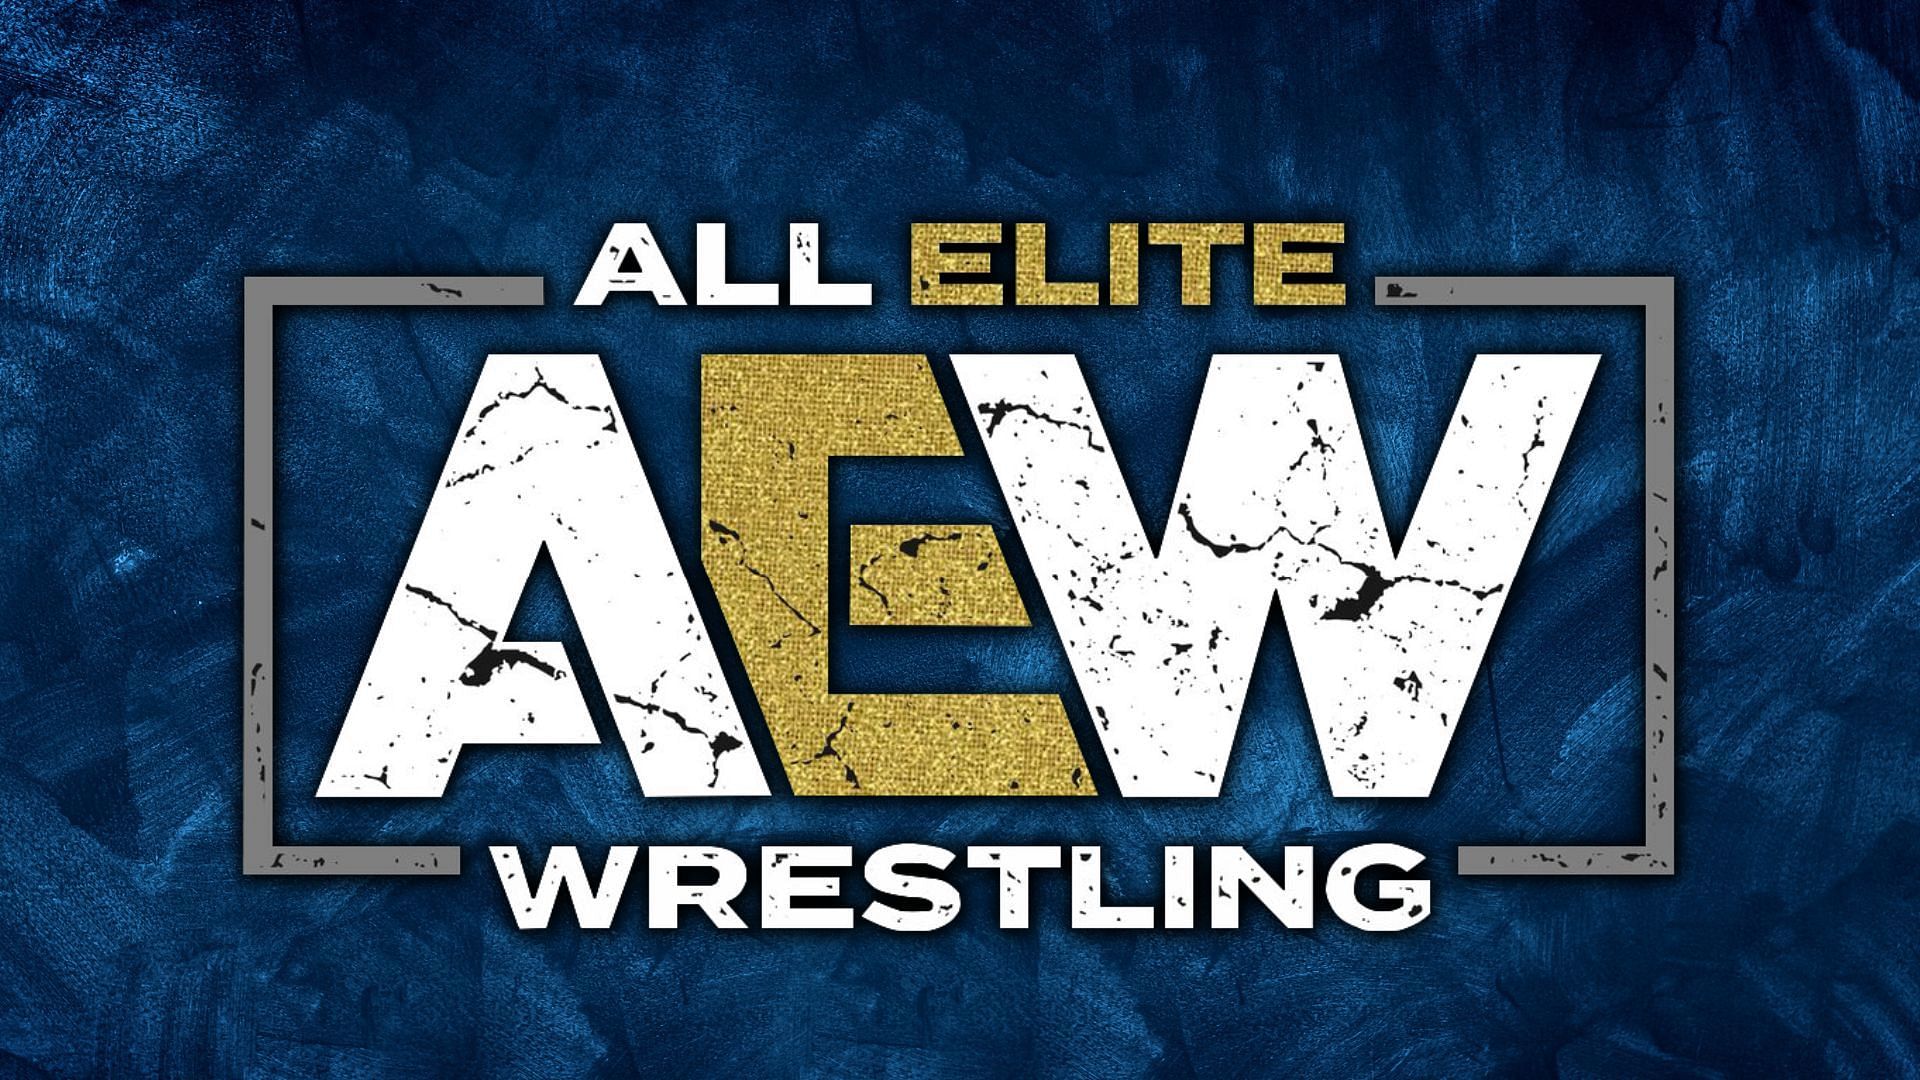 AEW had a rather innuendo-filled segment this week